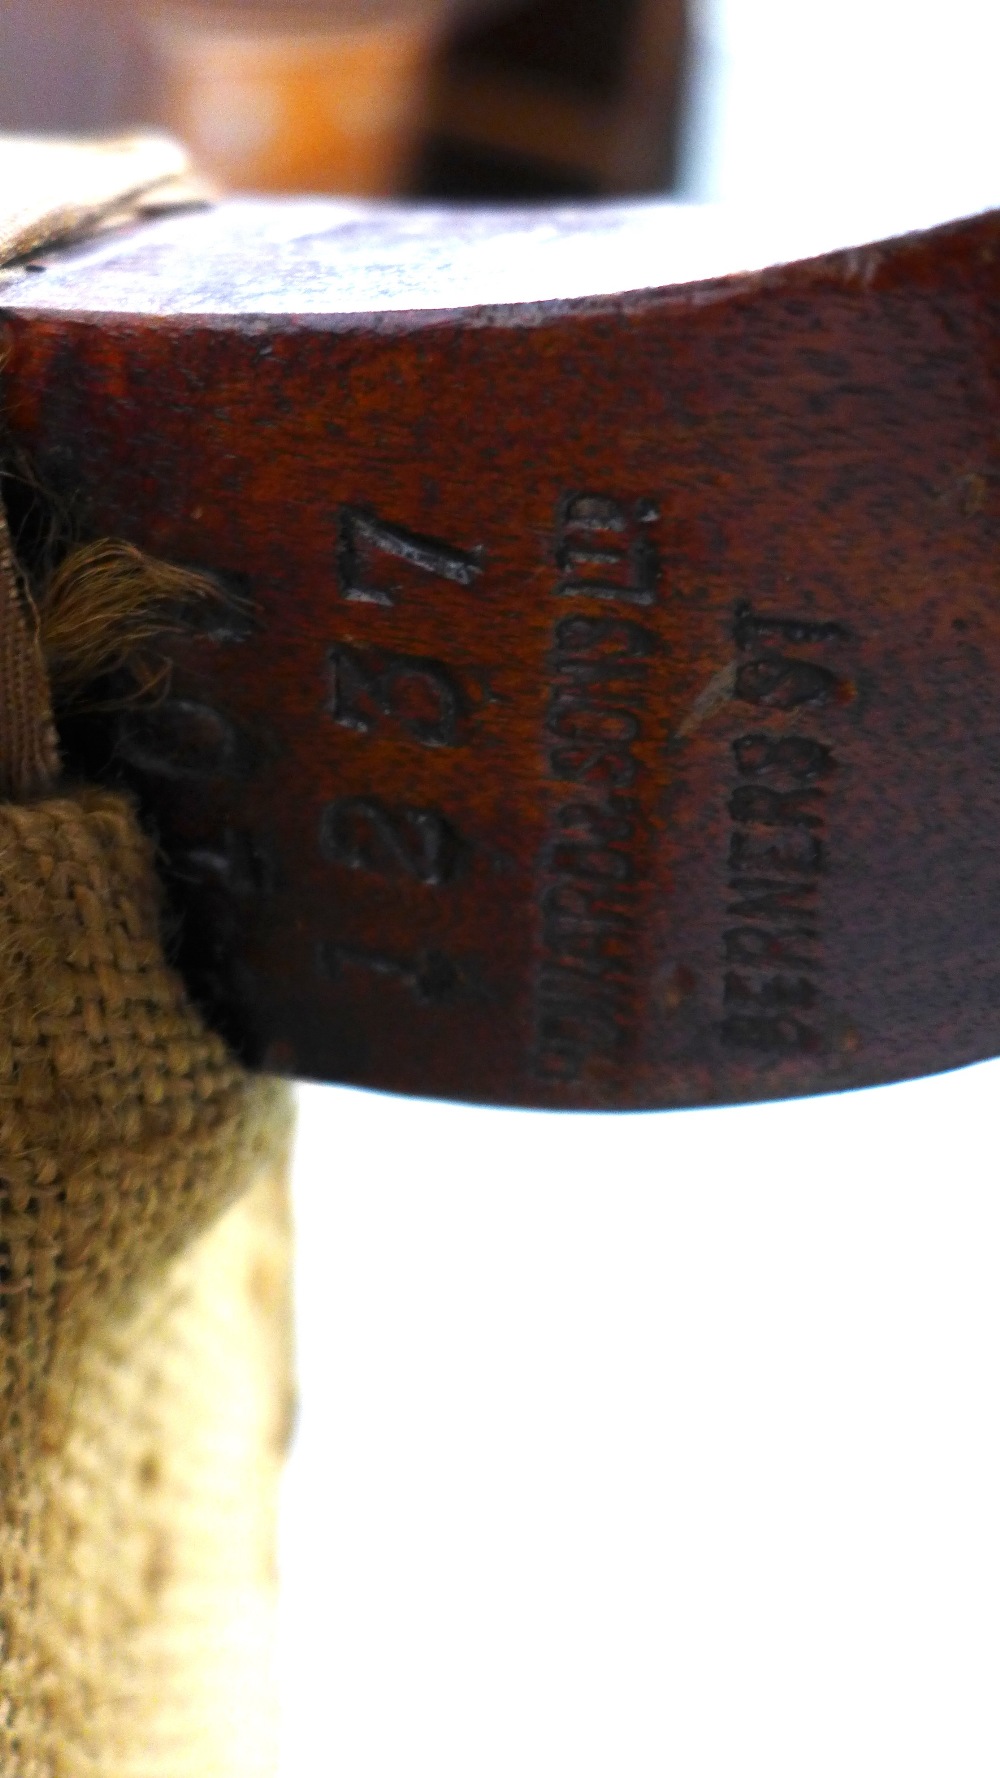 Howard & Sons Country house armchair, rear leg stamped HOWARD & SONS LTD, BERNERS ST 7 numbered - Image 4 of 5